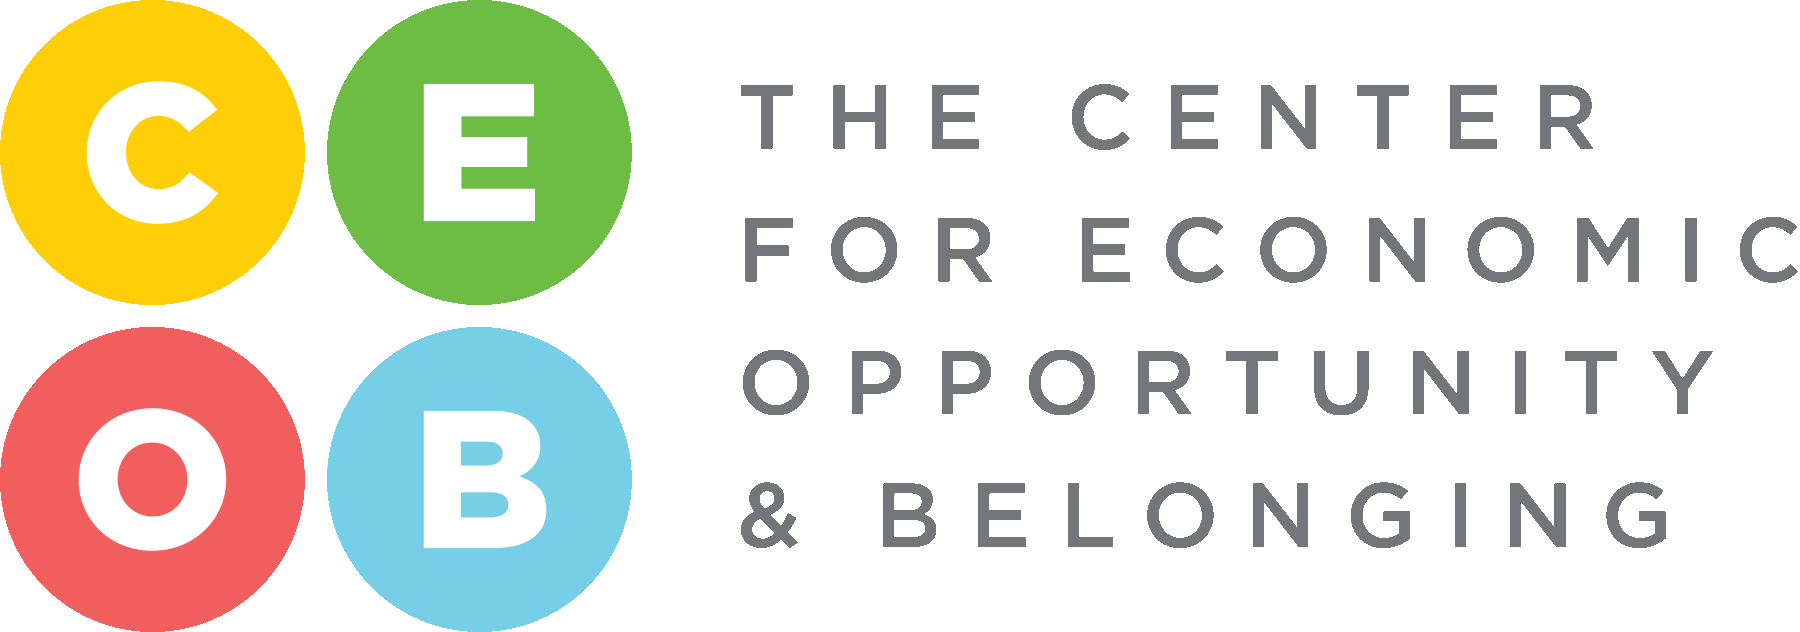 Center for Economic Opportunity & Belonging at EDCUtah